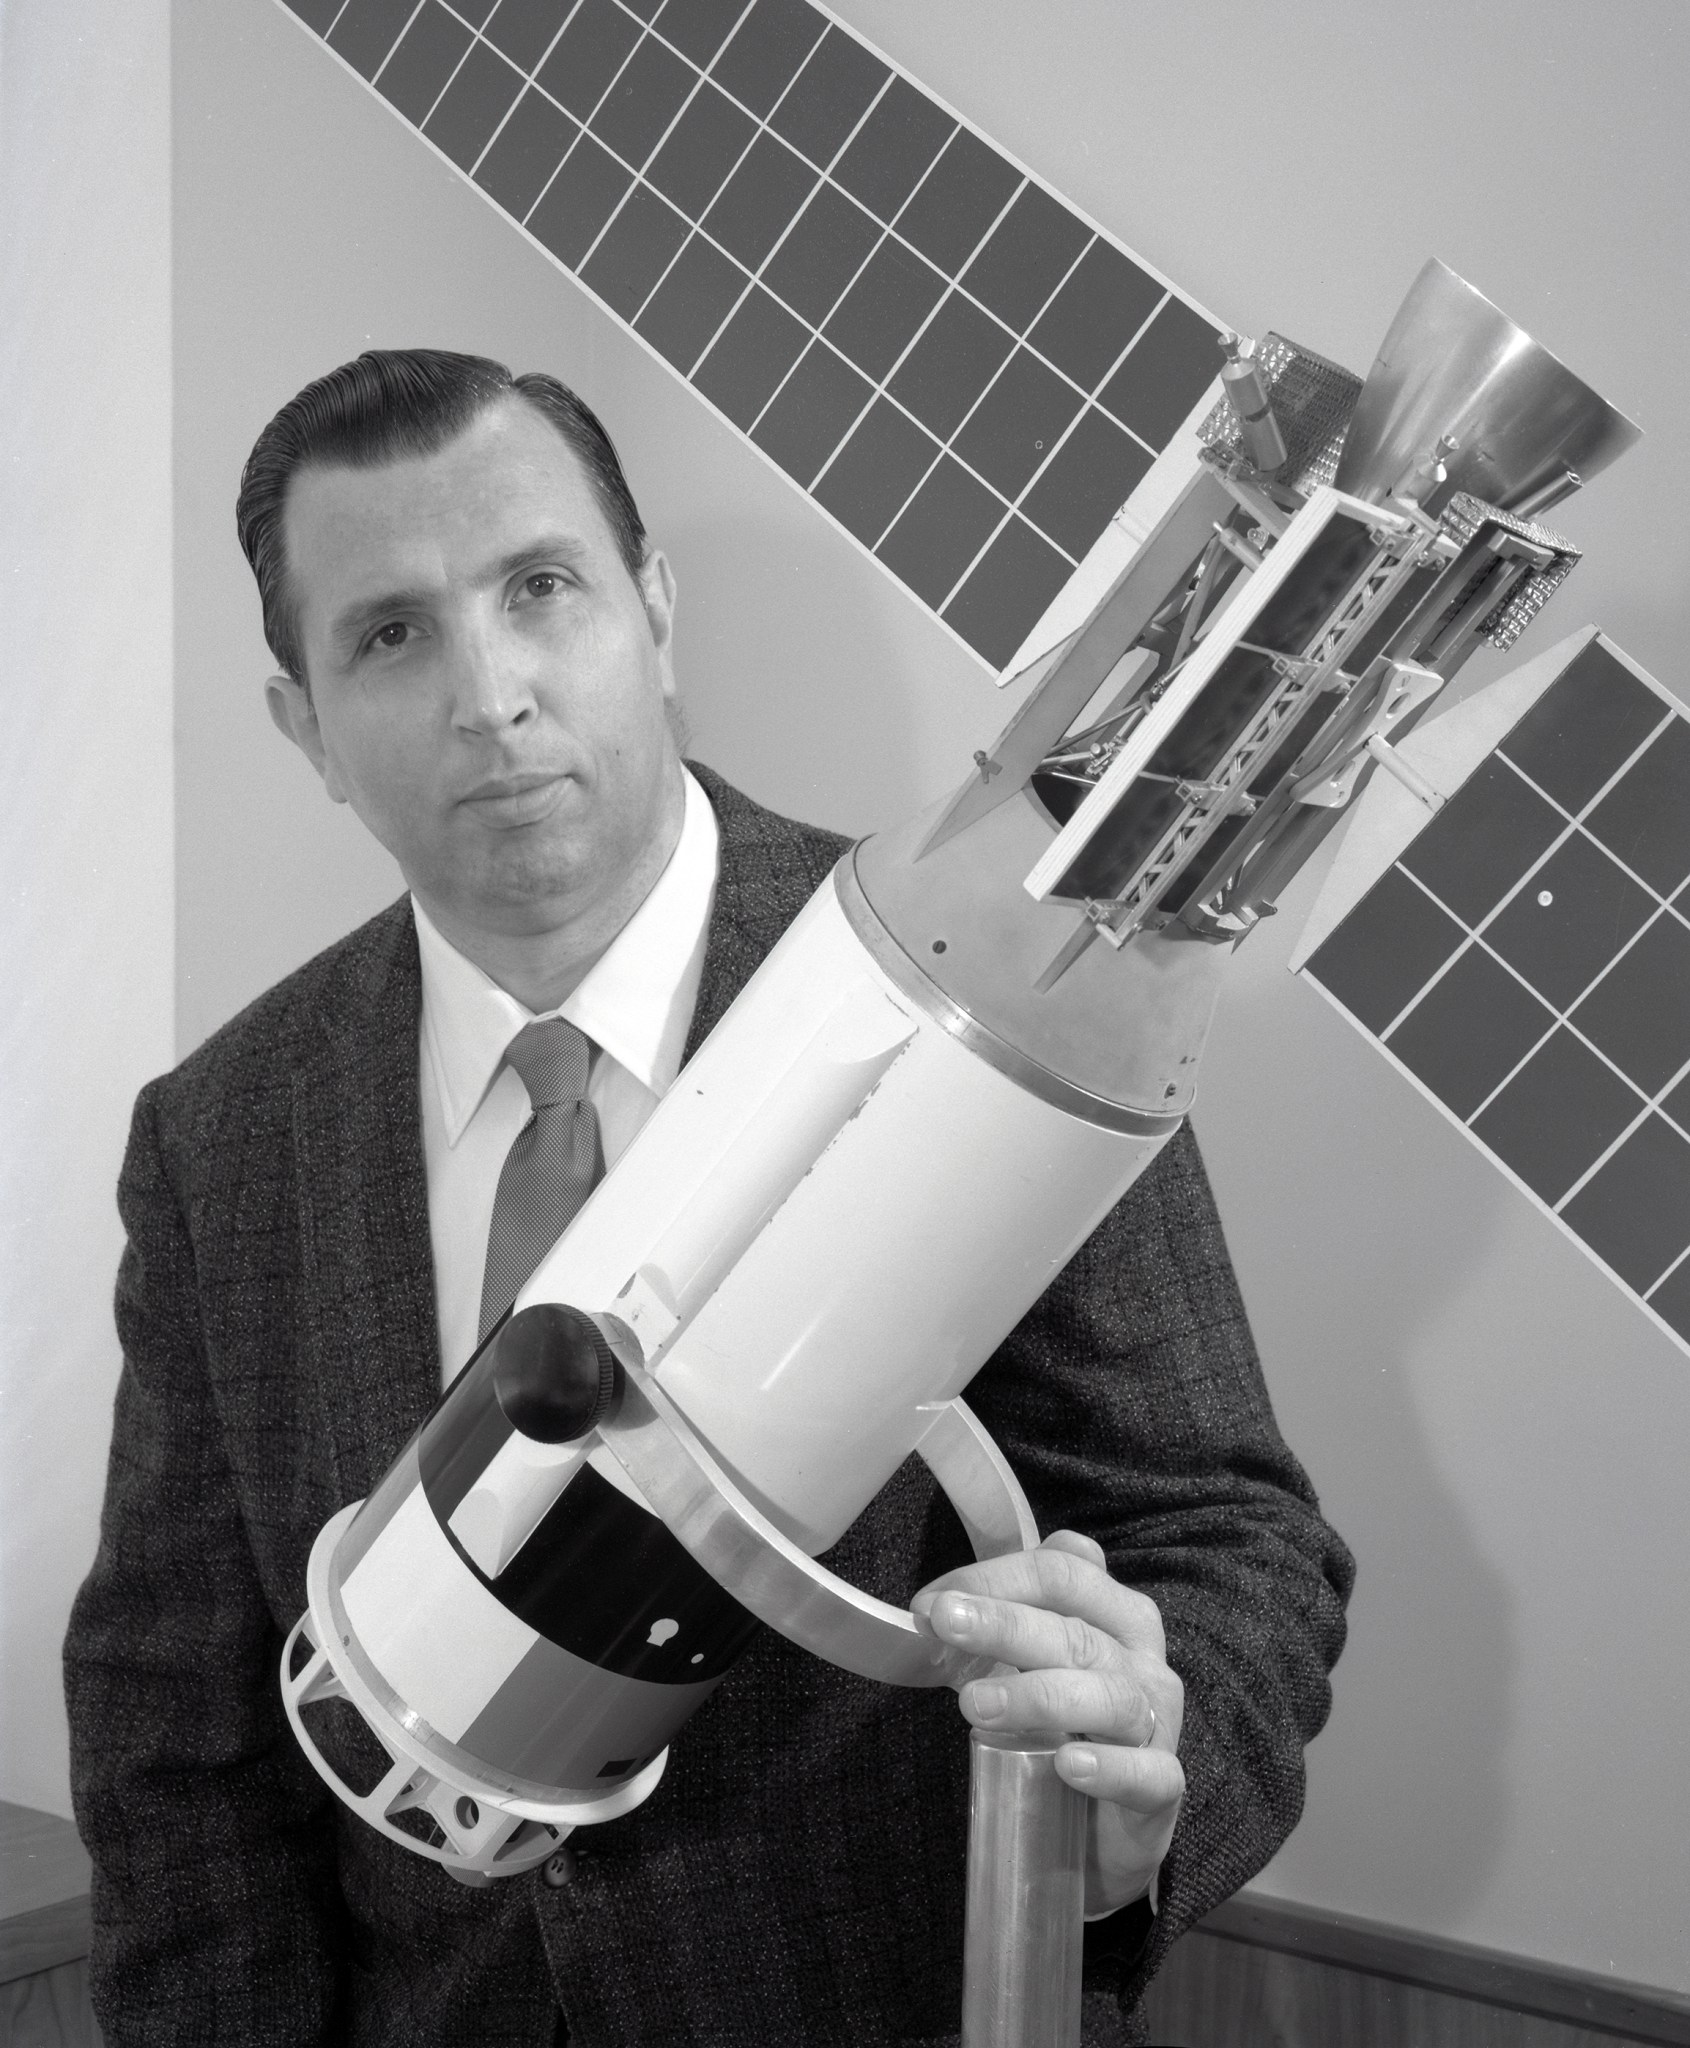 Man with spacecraft model.